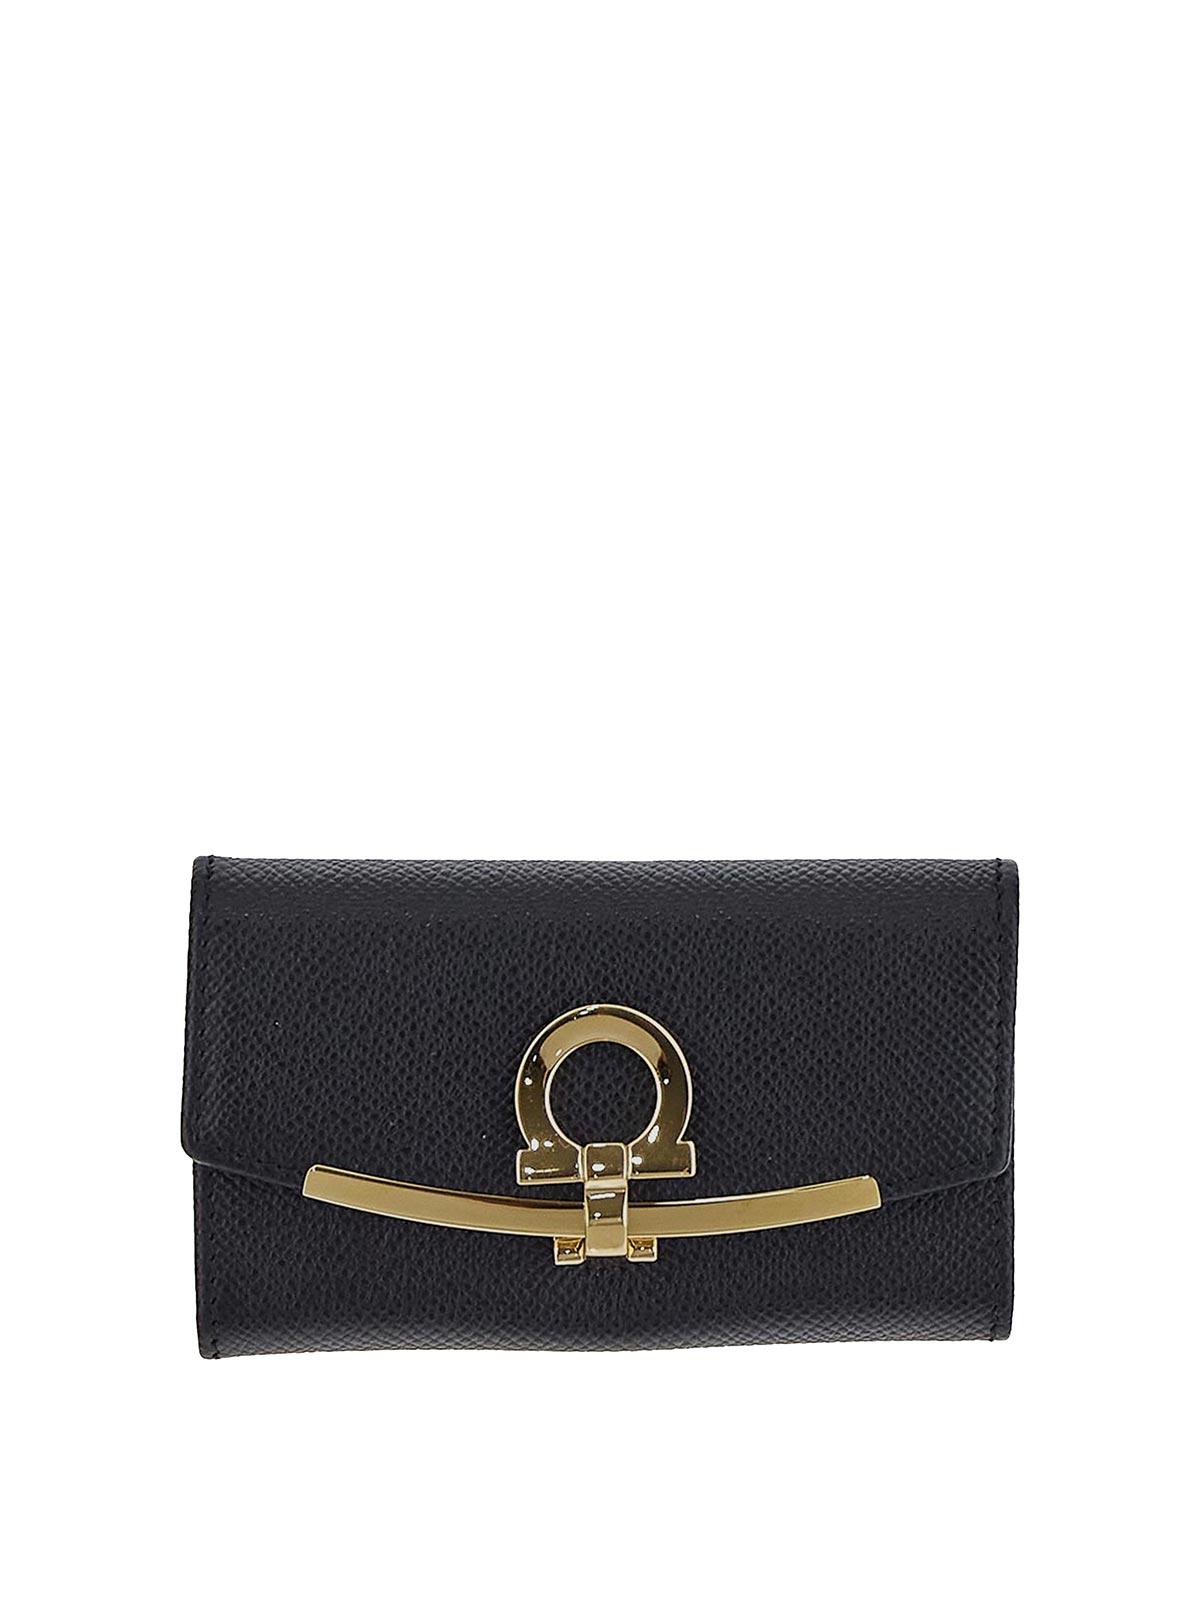 Valextra Coin Purse In Black Grained With Flap